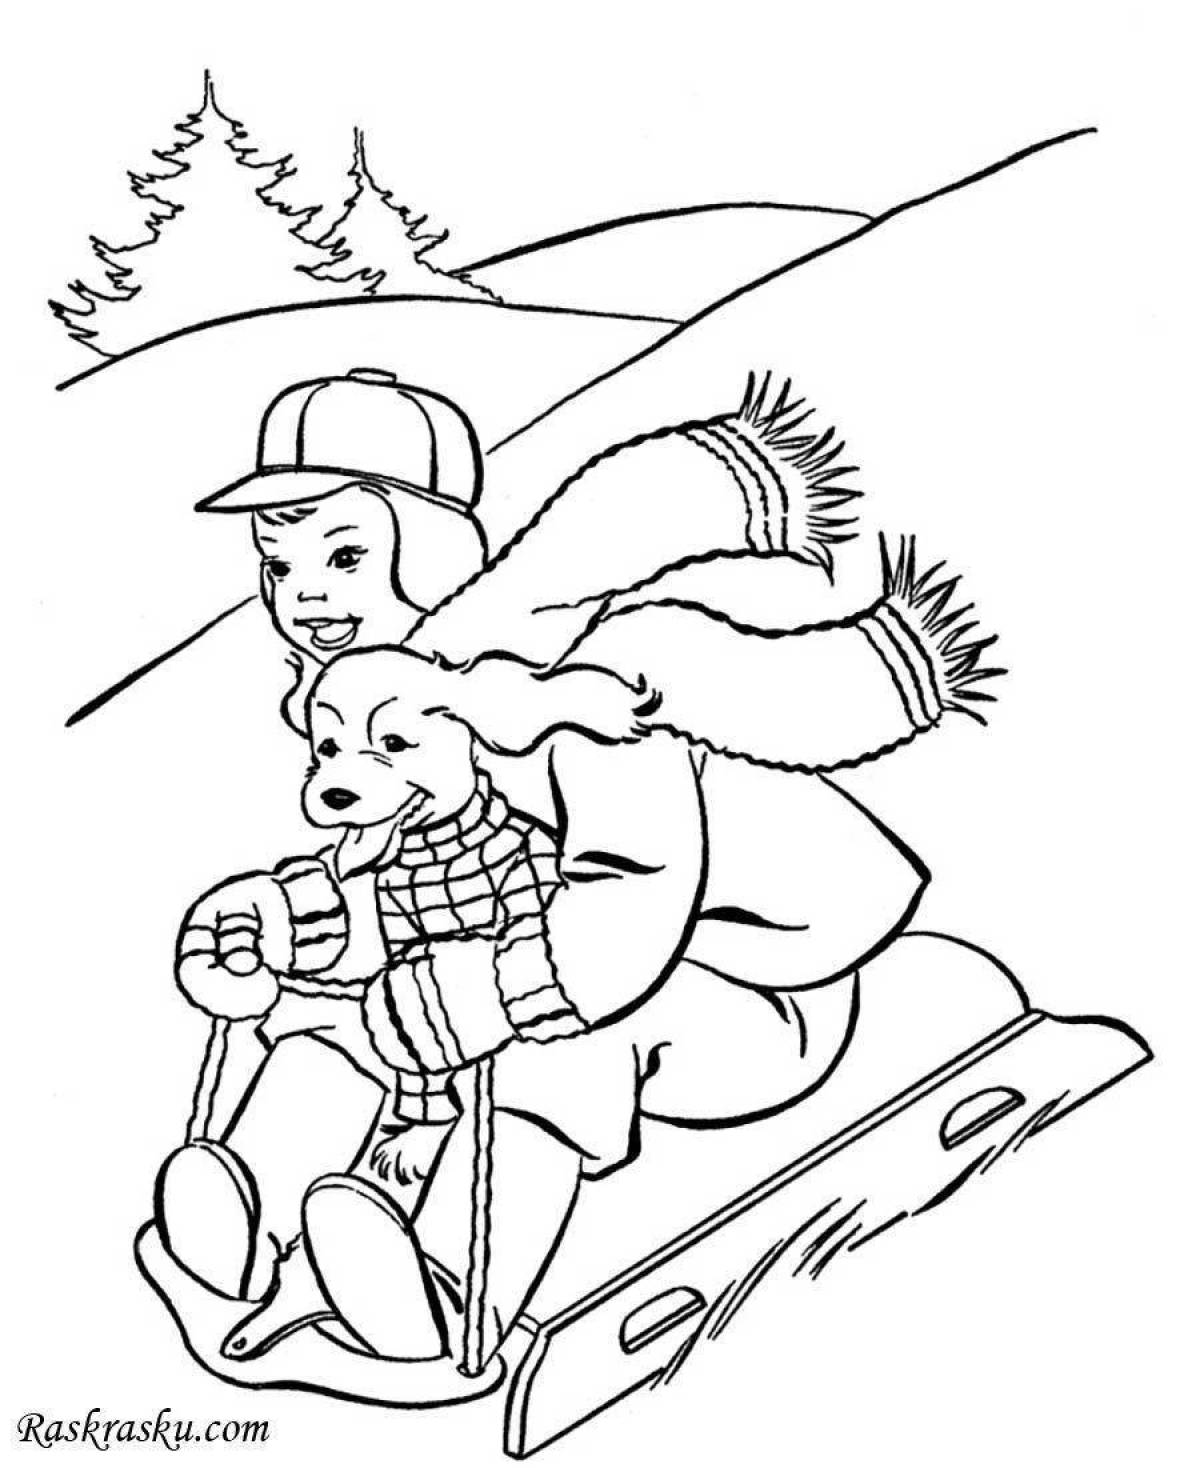 Exquisite winter vacation coloring book